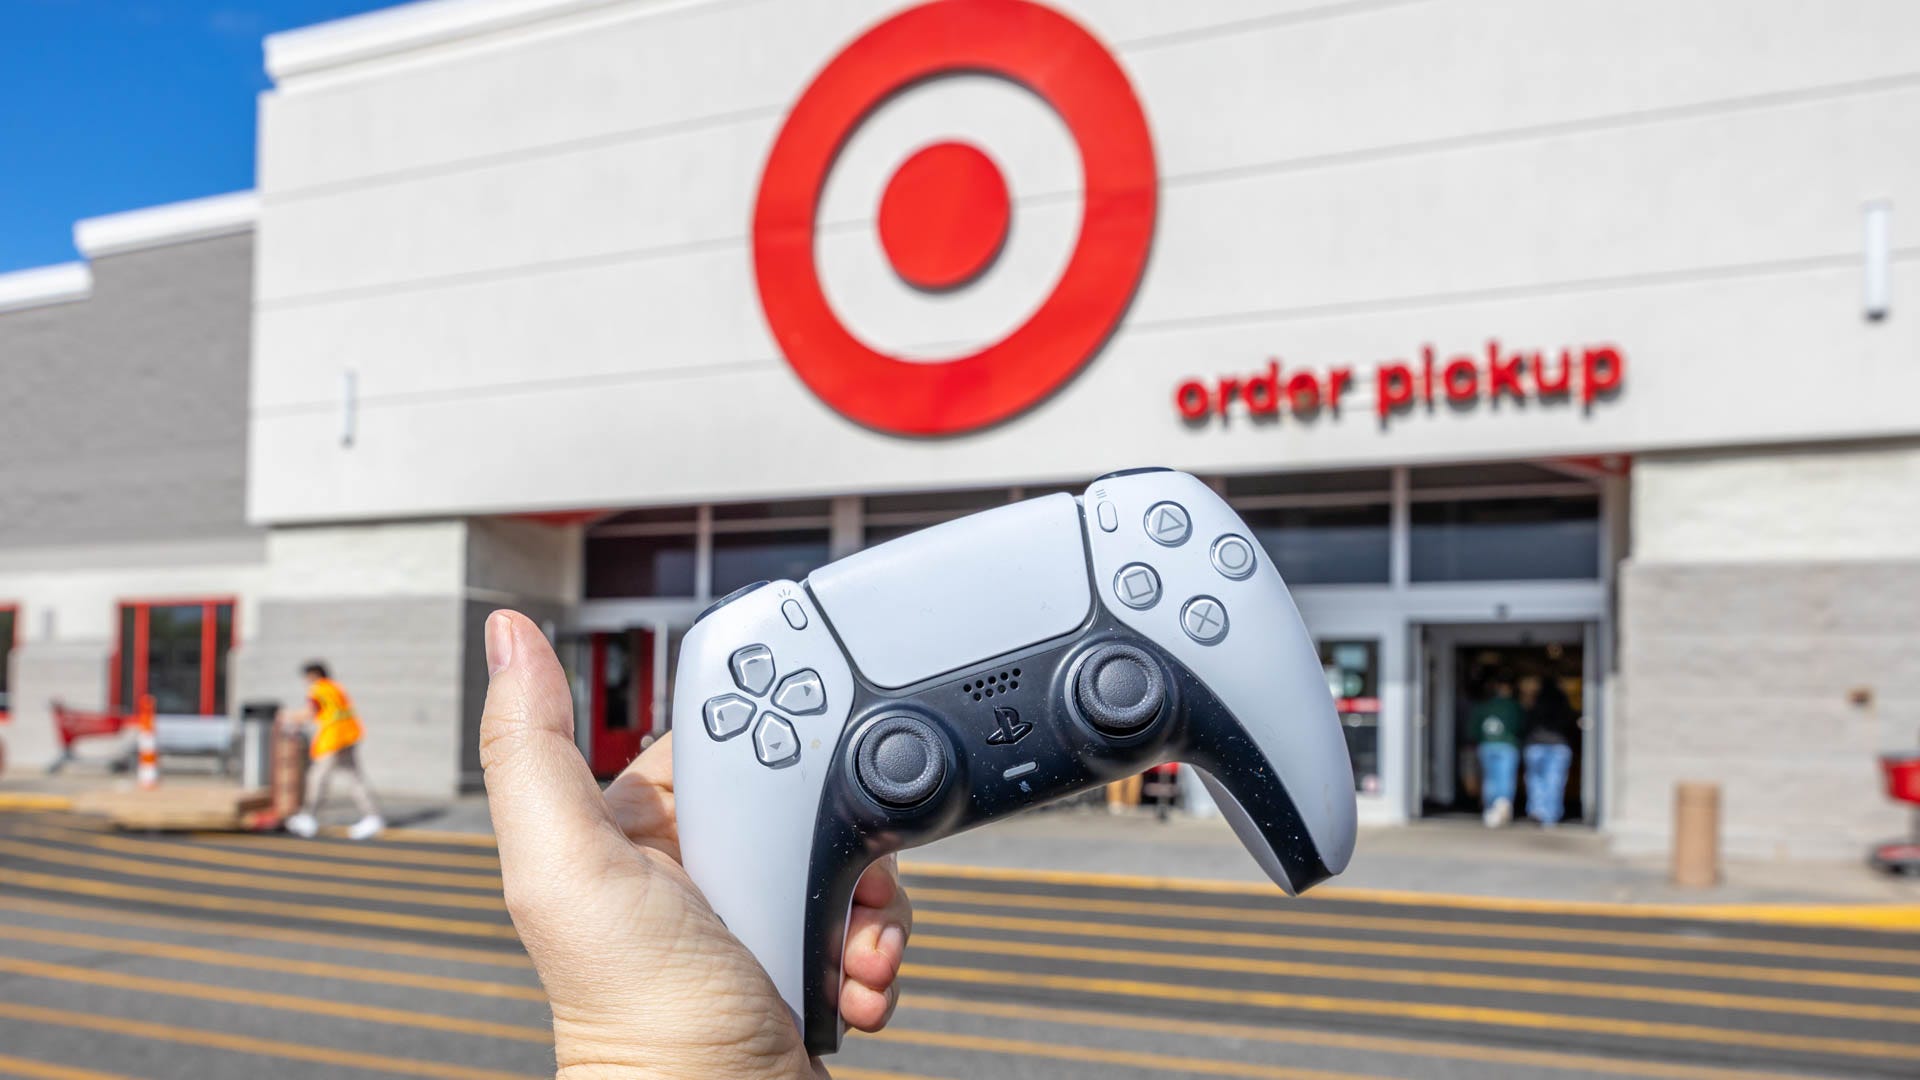 PS5 restock at Target sells out - where to find a console next